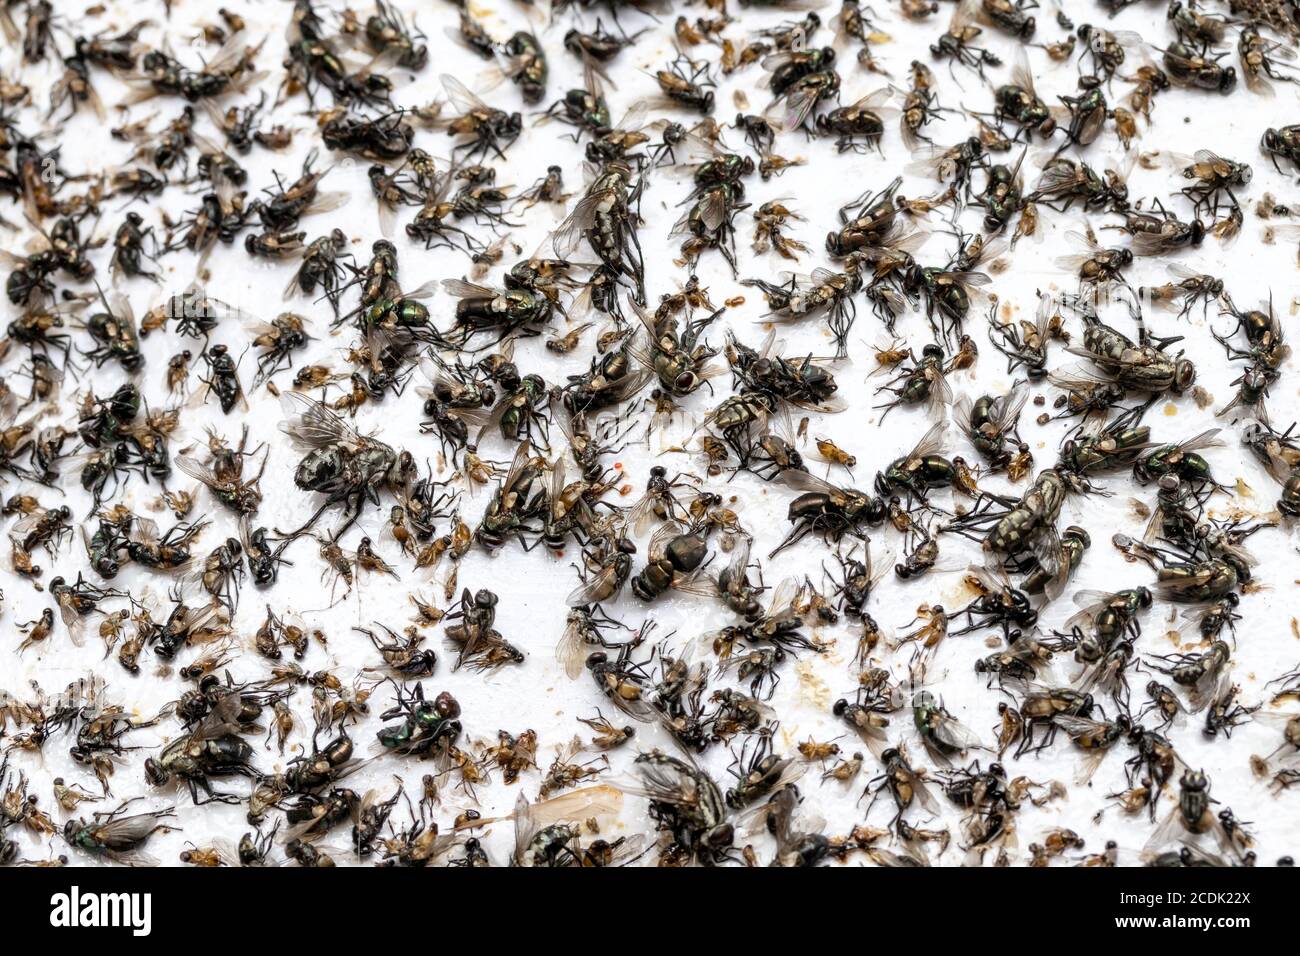 https://c8.alamy.com/comp/2CDK22X/close-up-a-sticky-fly-paper-fly-trap-flies-caught-on-sticky-fly-paper-trap-macro-many-flies-trapped-on-the-extremely-sticky-surface-2CDK22X.jpg